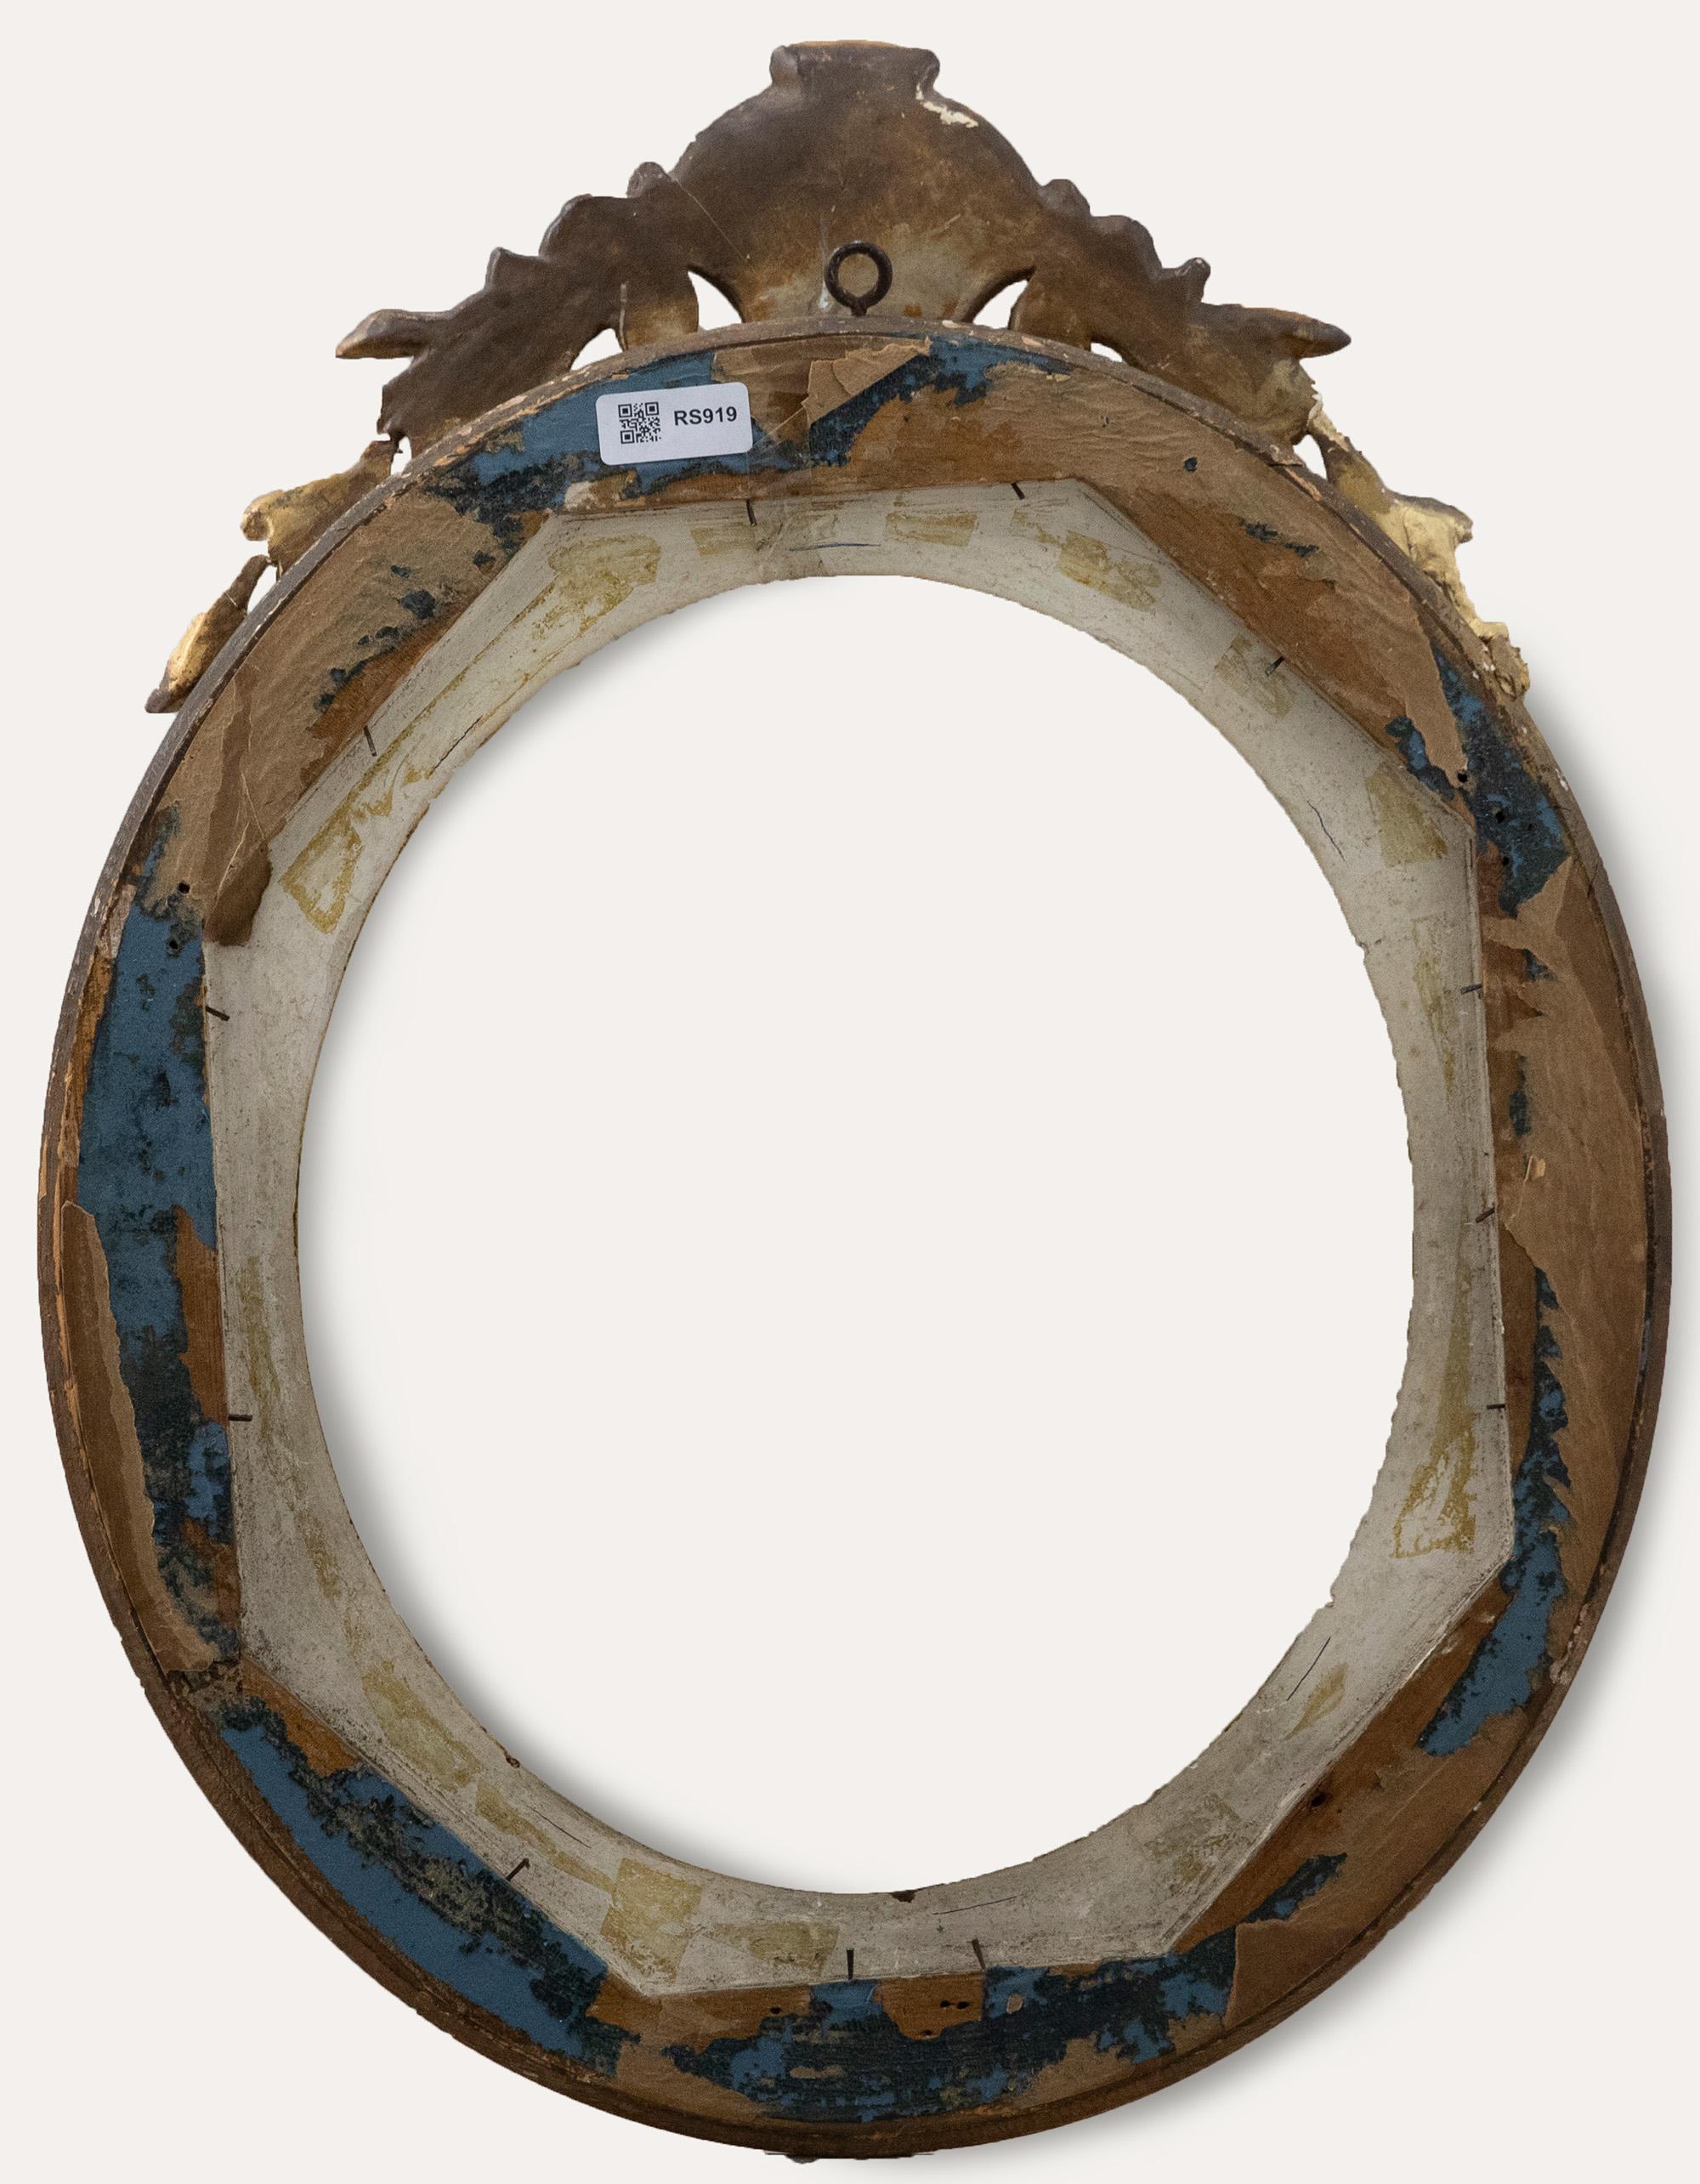 A wonderful 19th century gilt oval picture frame in the French Rococo style, elaborately decorated with foliate running patterns and elaborate upper gesso shell and acanthus ornamentation.Measurements for the frame are: Window (39 x 33.5cm); Rebate